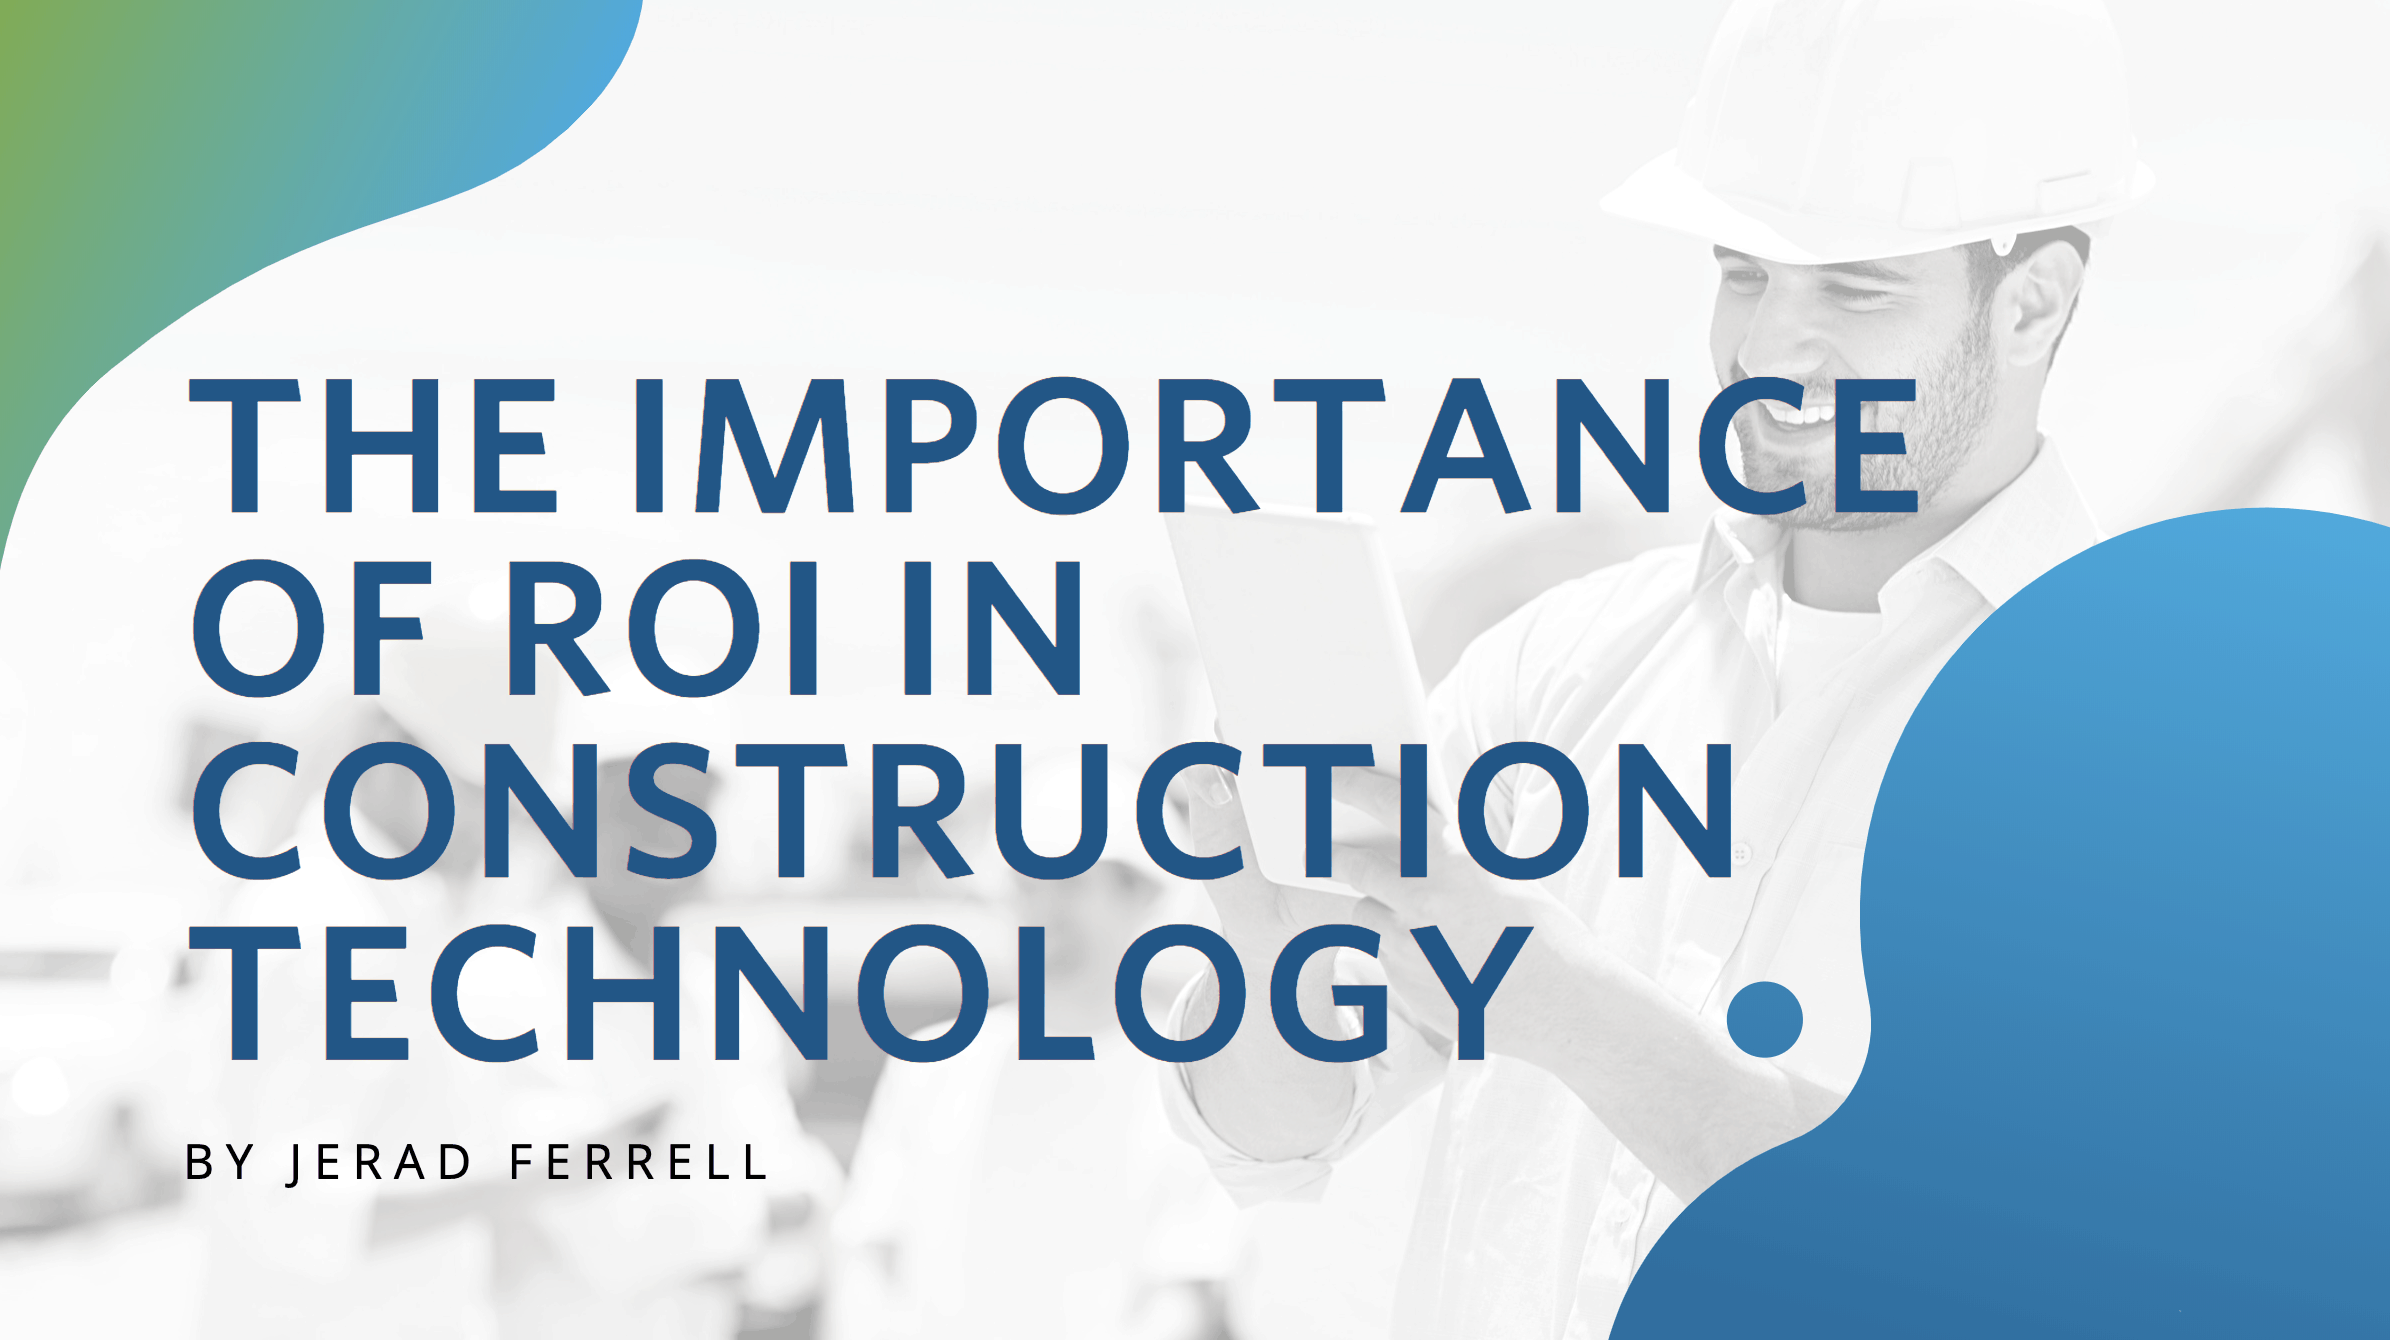 The Importance of ROI in Construction Technology.